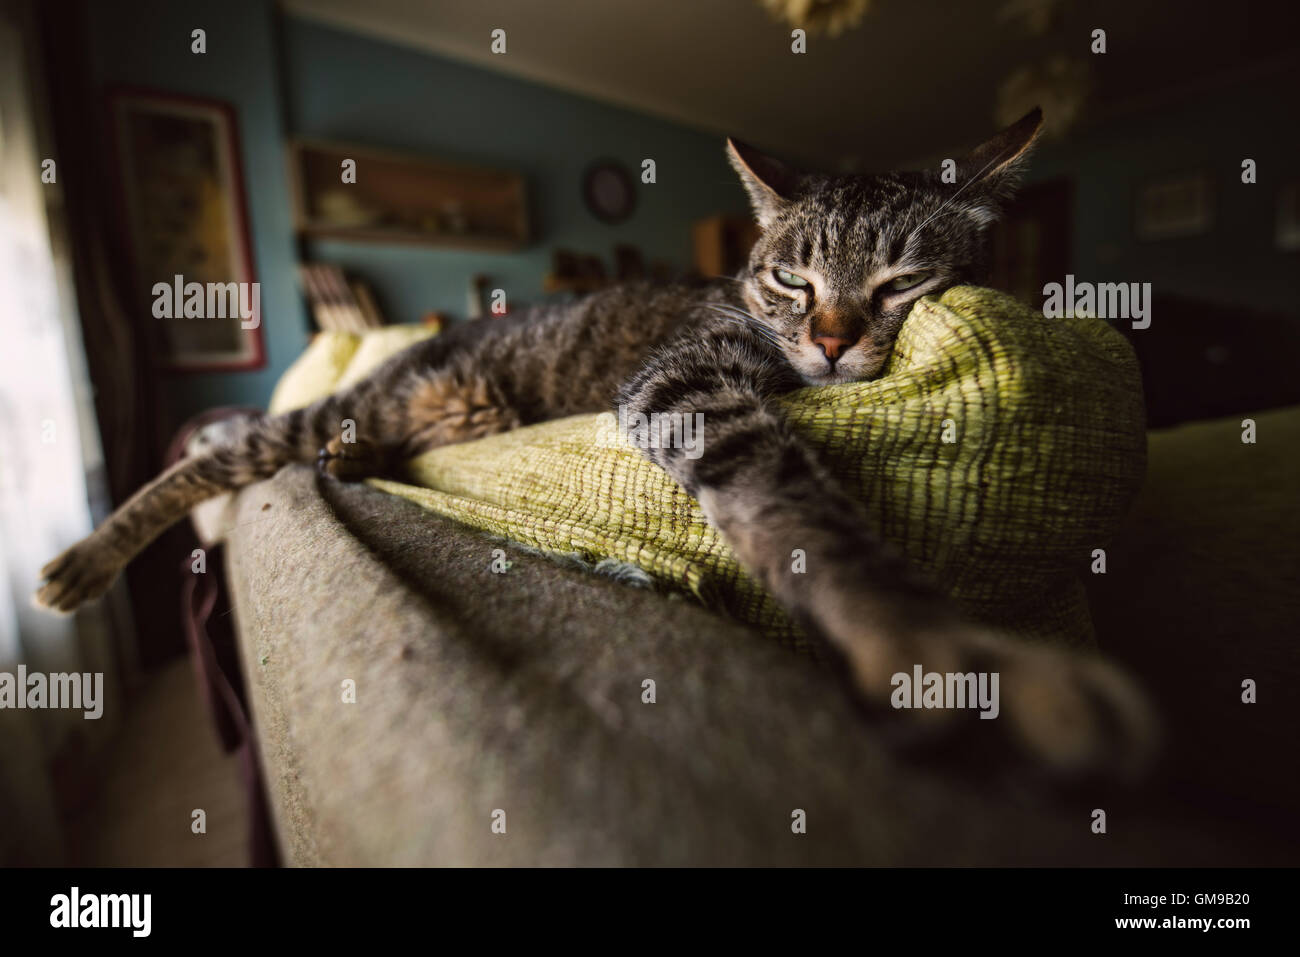 Tabby cat relaxing on couch Stock Photo